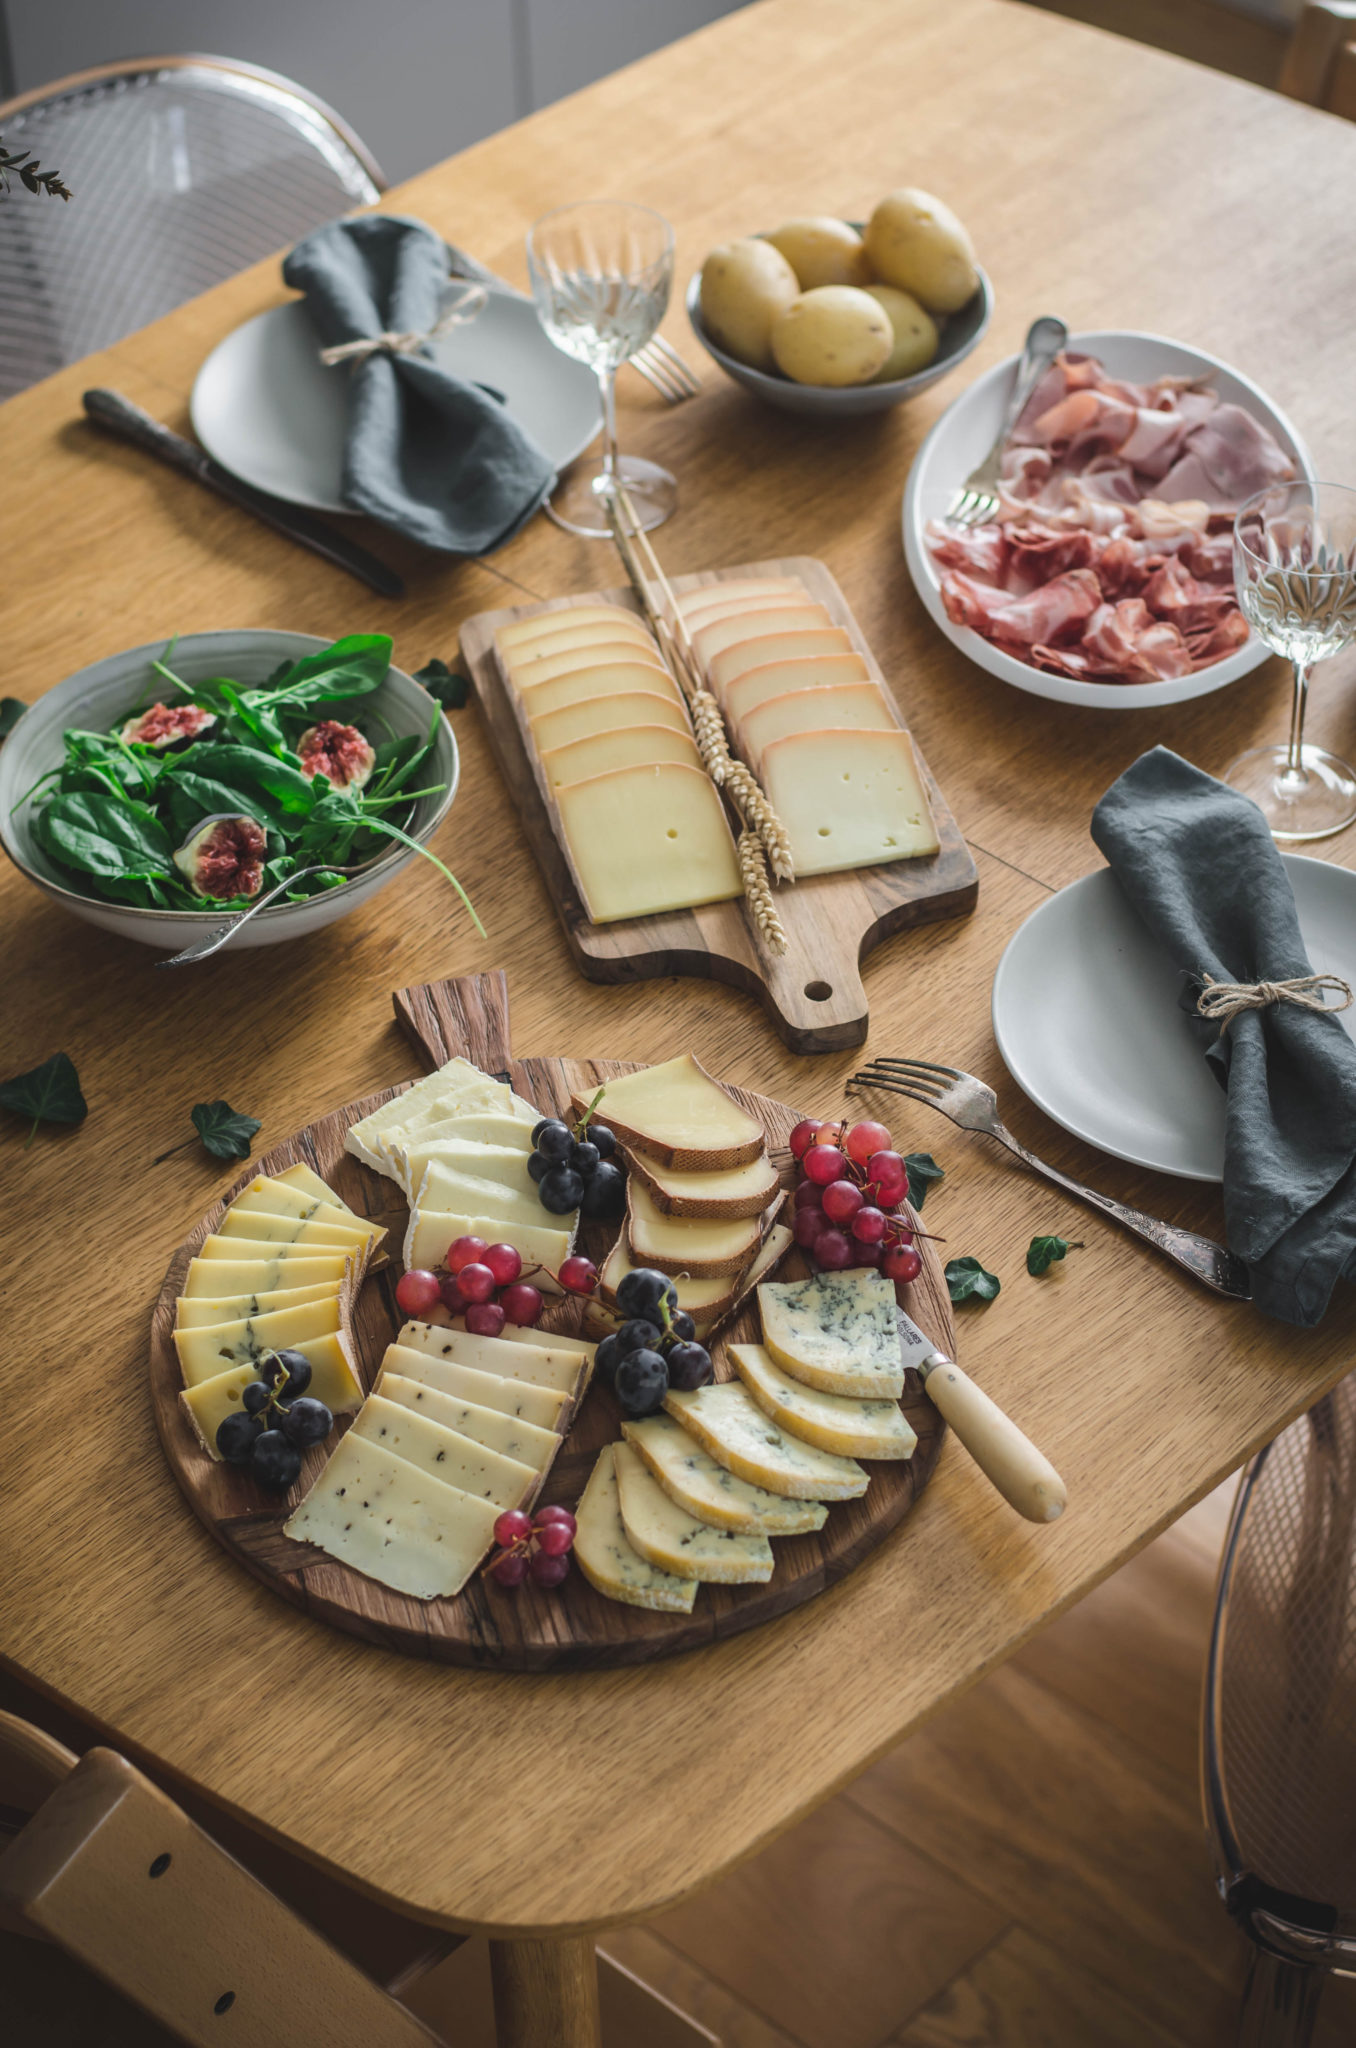 Homemade raclette, how to make it and which cheeses to choose